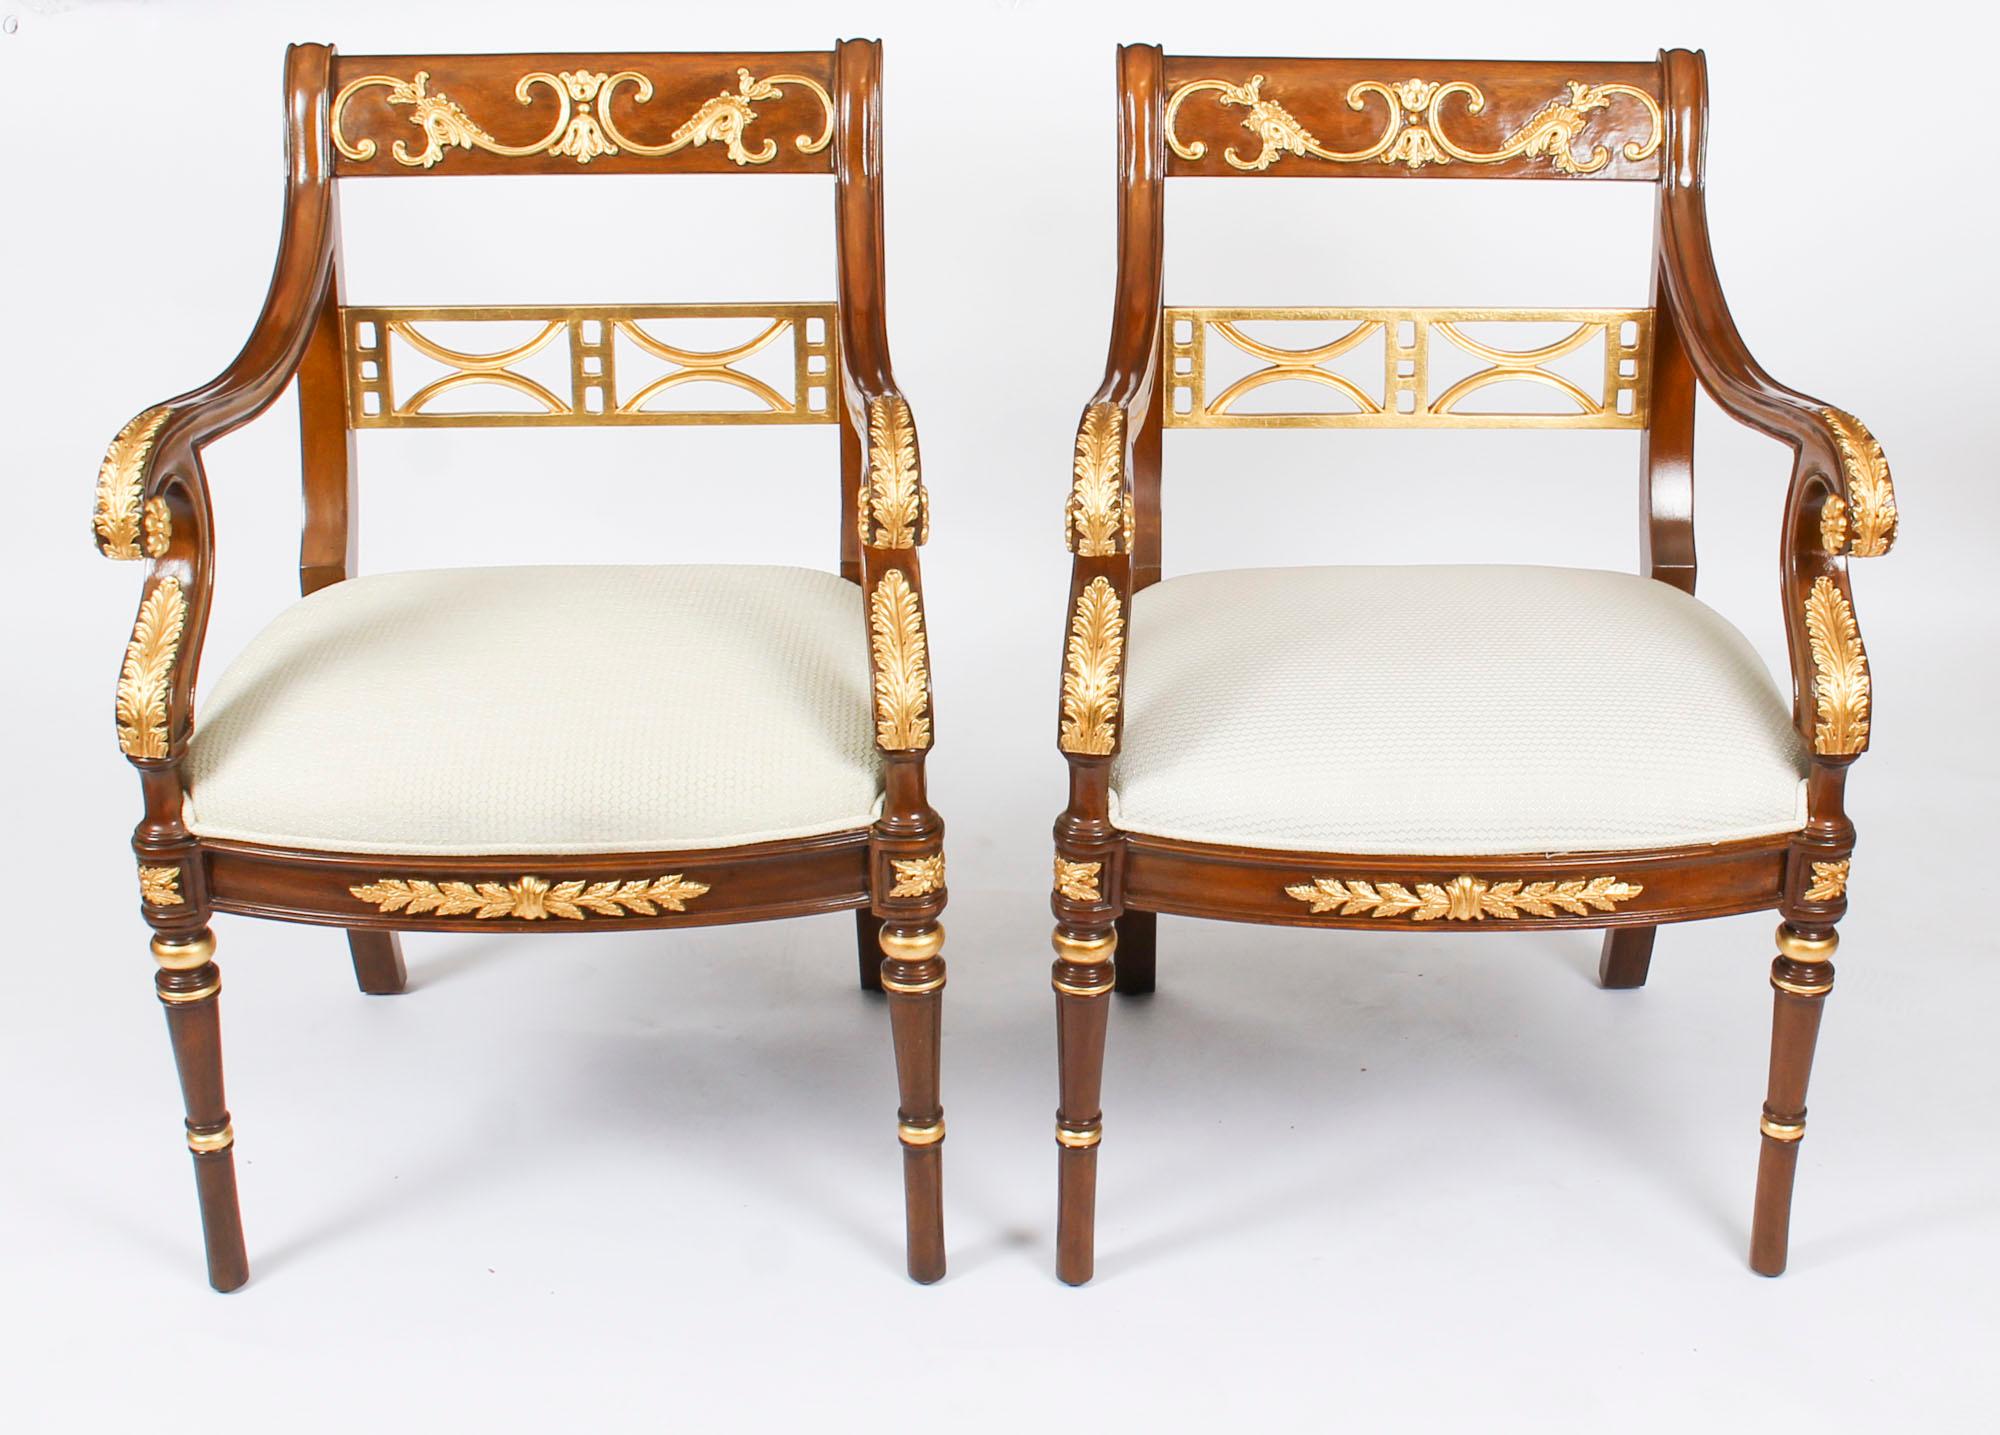 This is a beautiful vintage pair of Empire Revival mahogany and giltwood armchairs, late 20th century in date. 

The mahogany is beautiful in color and has been embellished with striking gilded high-lights in the form of acathus leaves and c